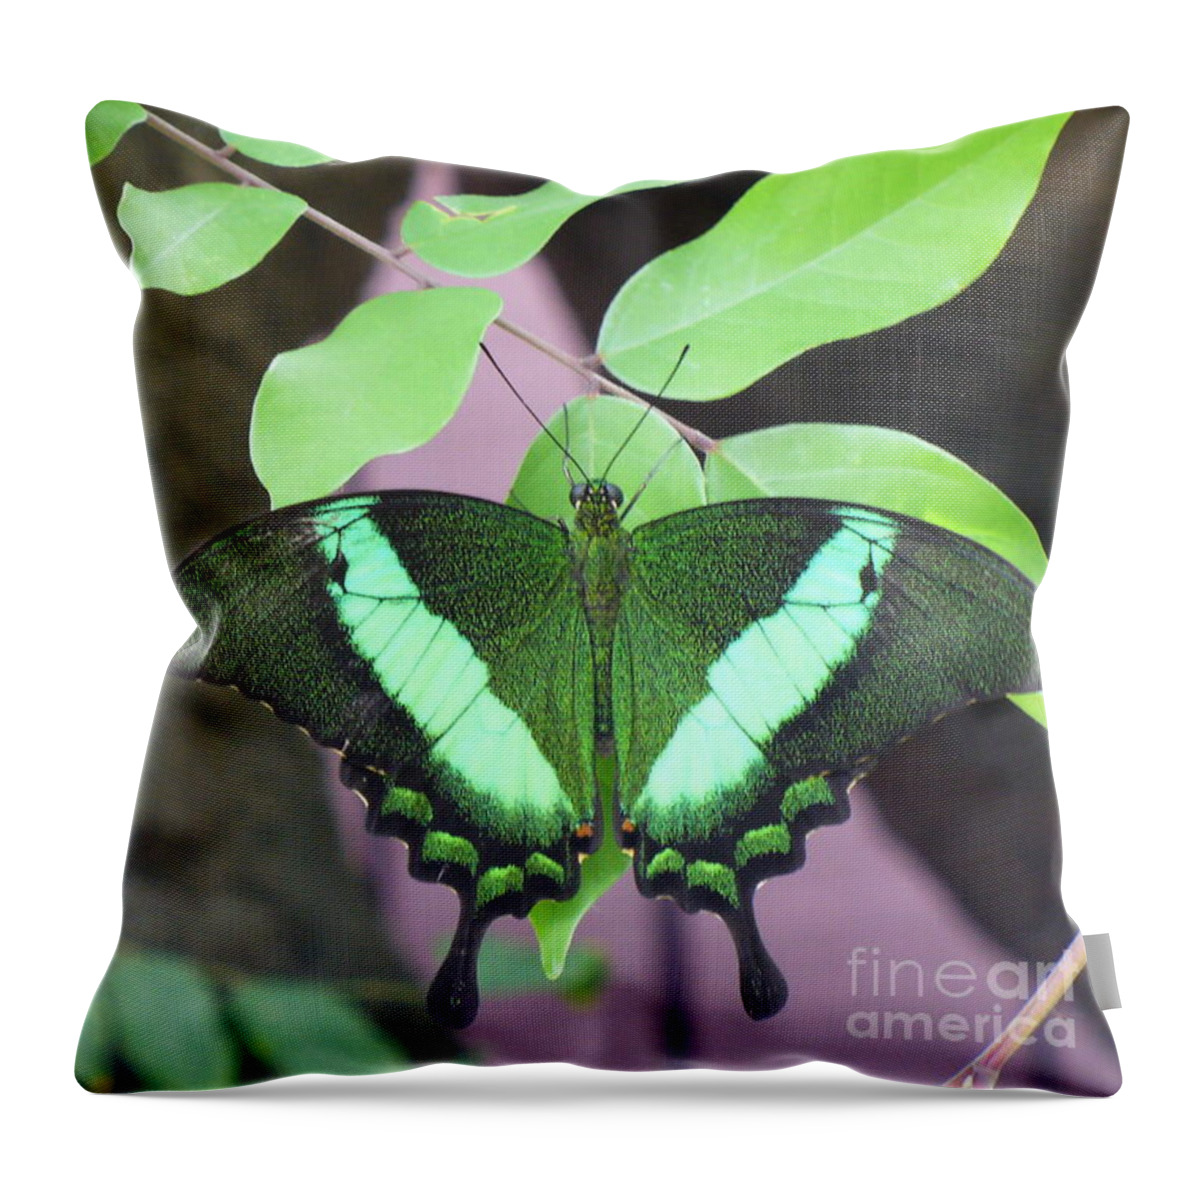 Butterfly Throw Pillow featuring the photograph Peacock Swallowtail by Lingfai Leung